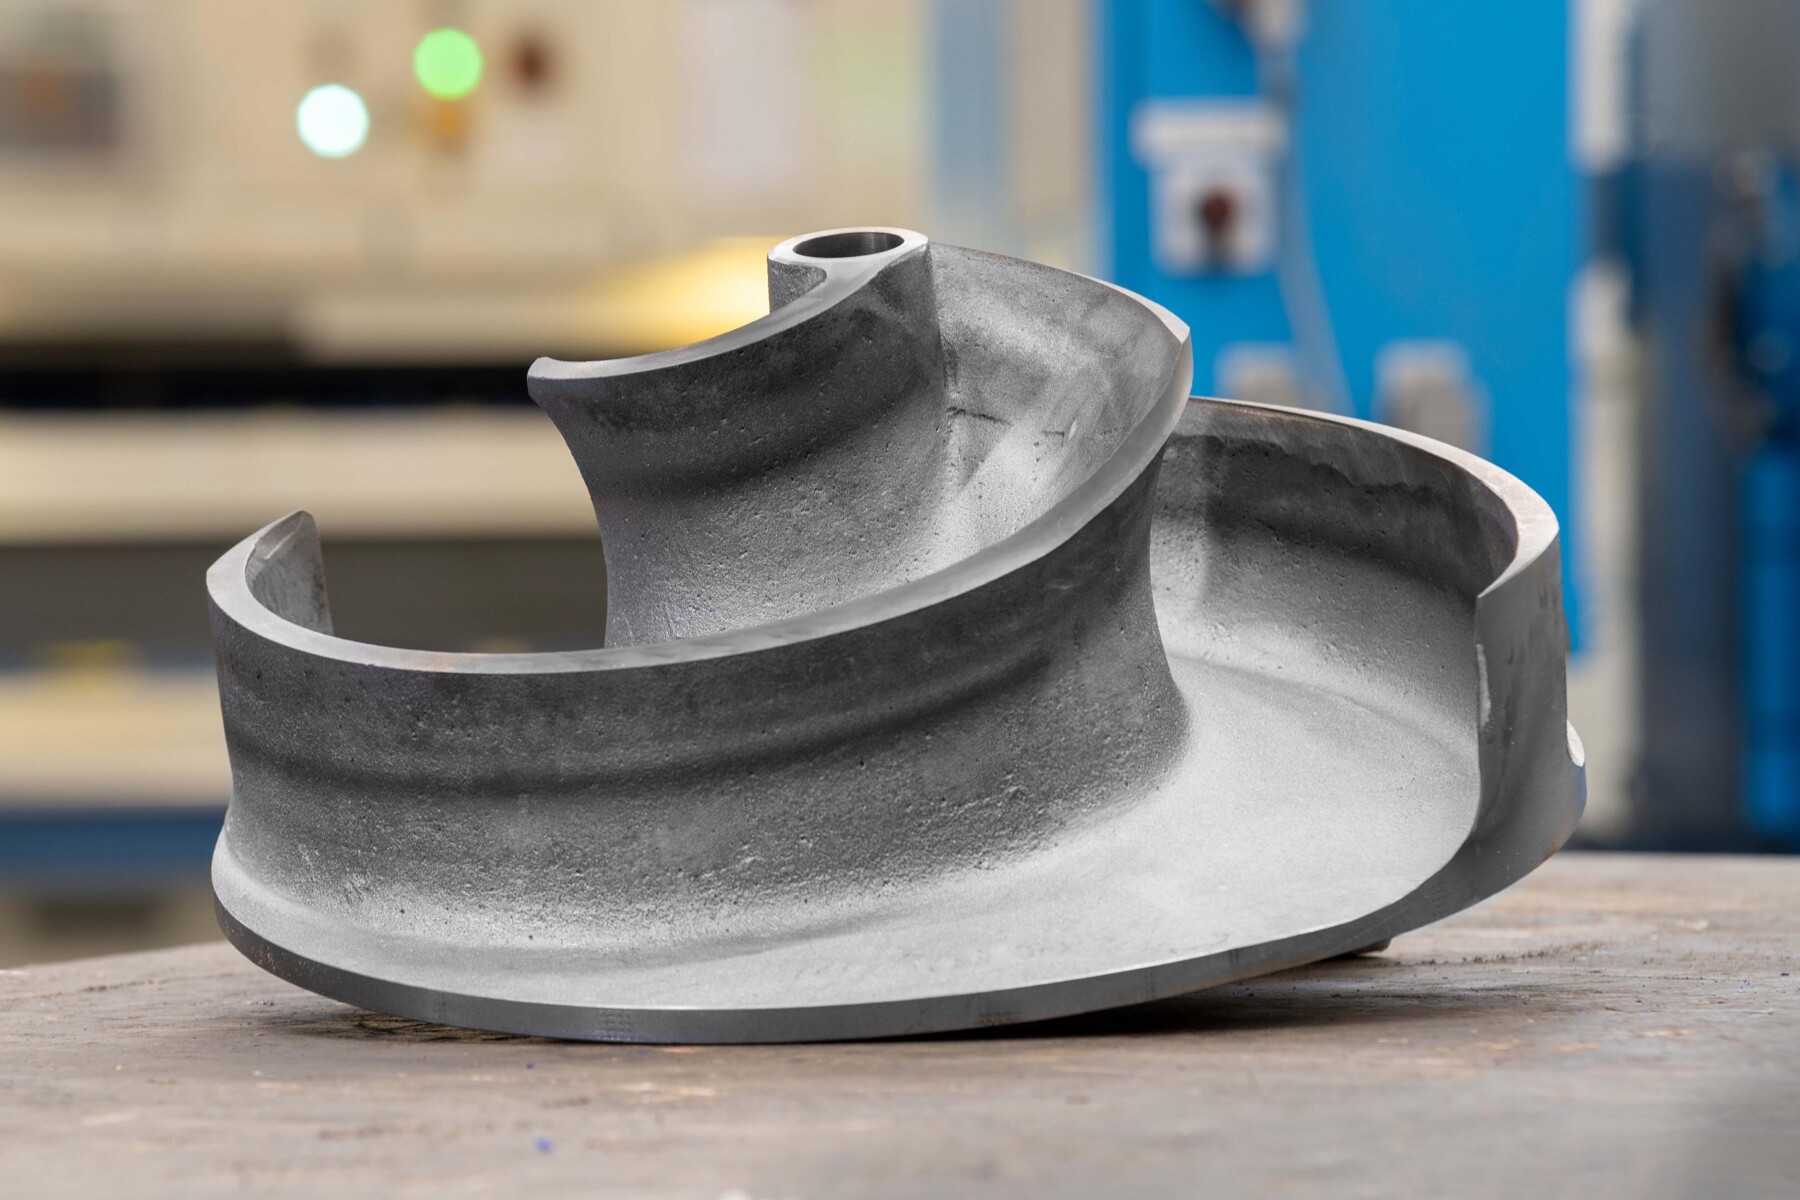 The new and highly efficient D-max impeller from the KSB Group